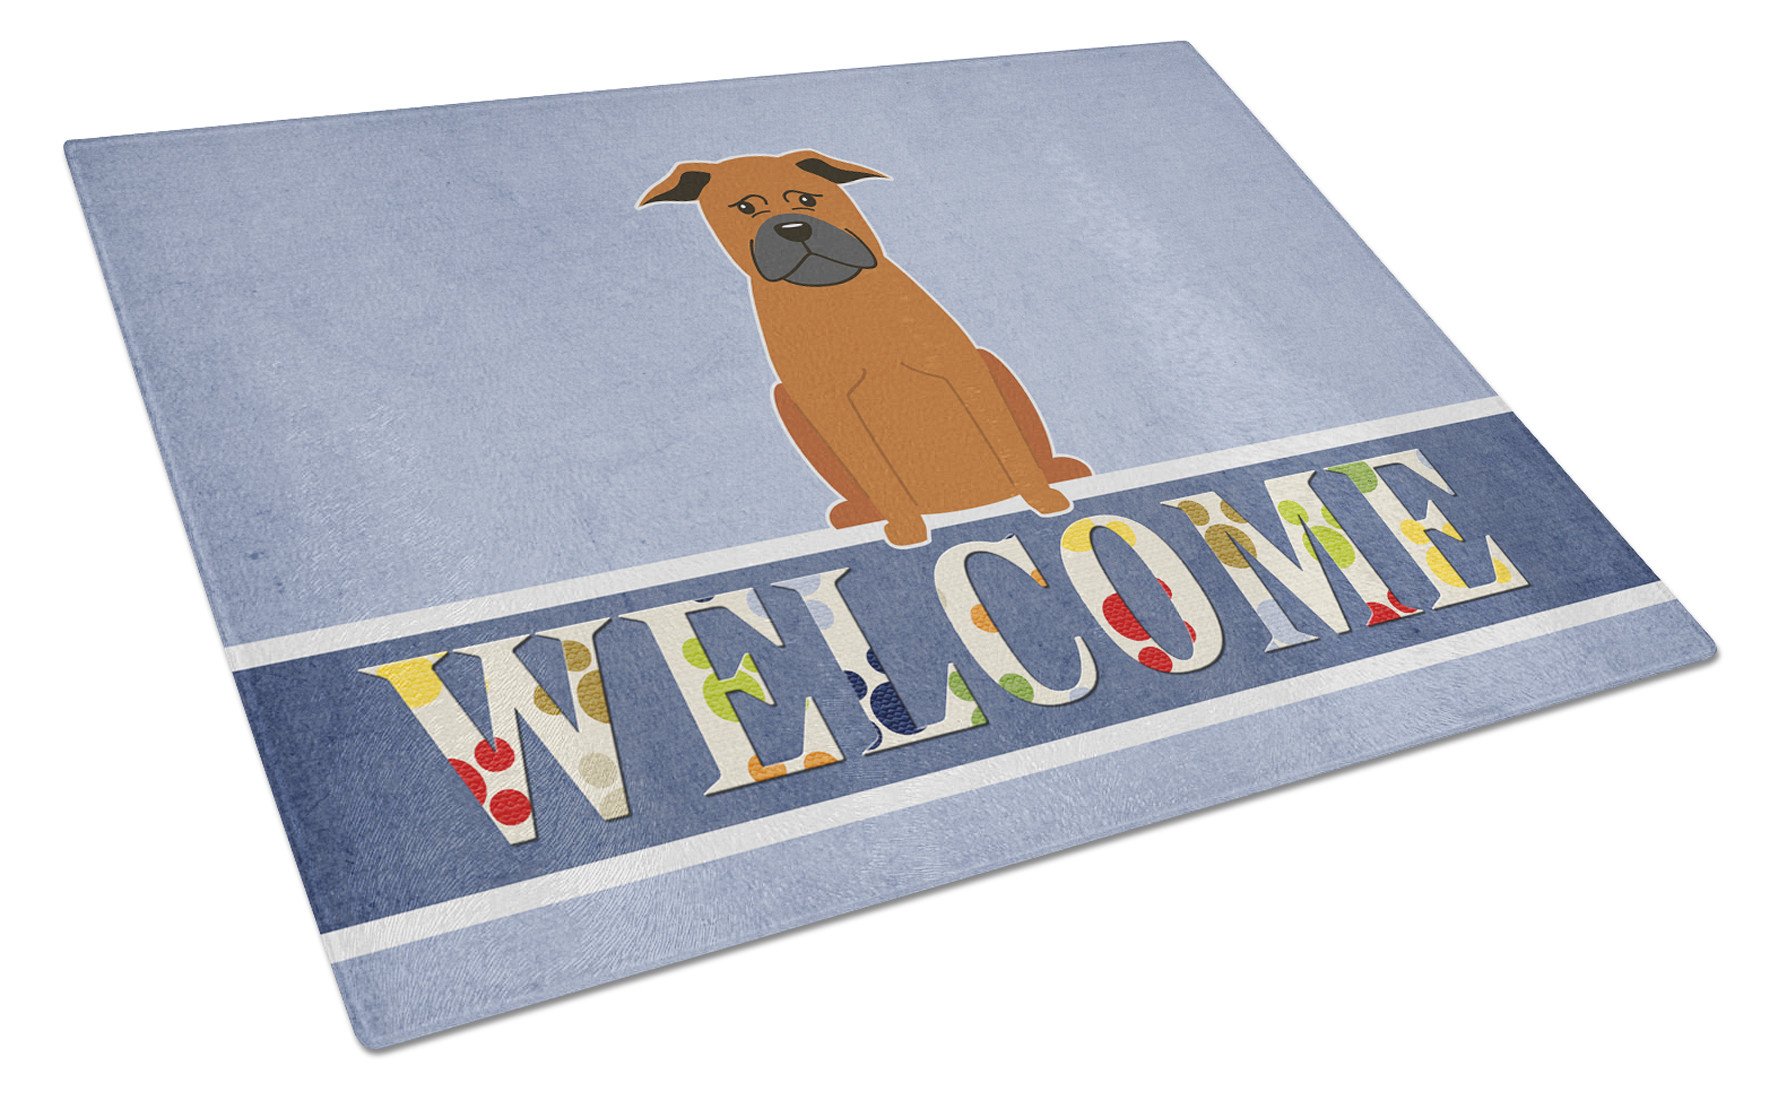 Chinese Chongqing Dog Welcome Glass Cutting Board Large BB5692LCB by Caroline's Treasures